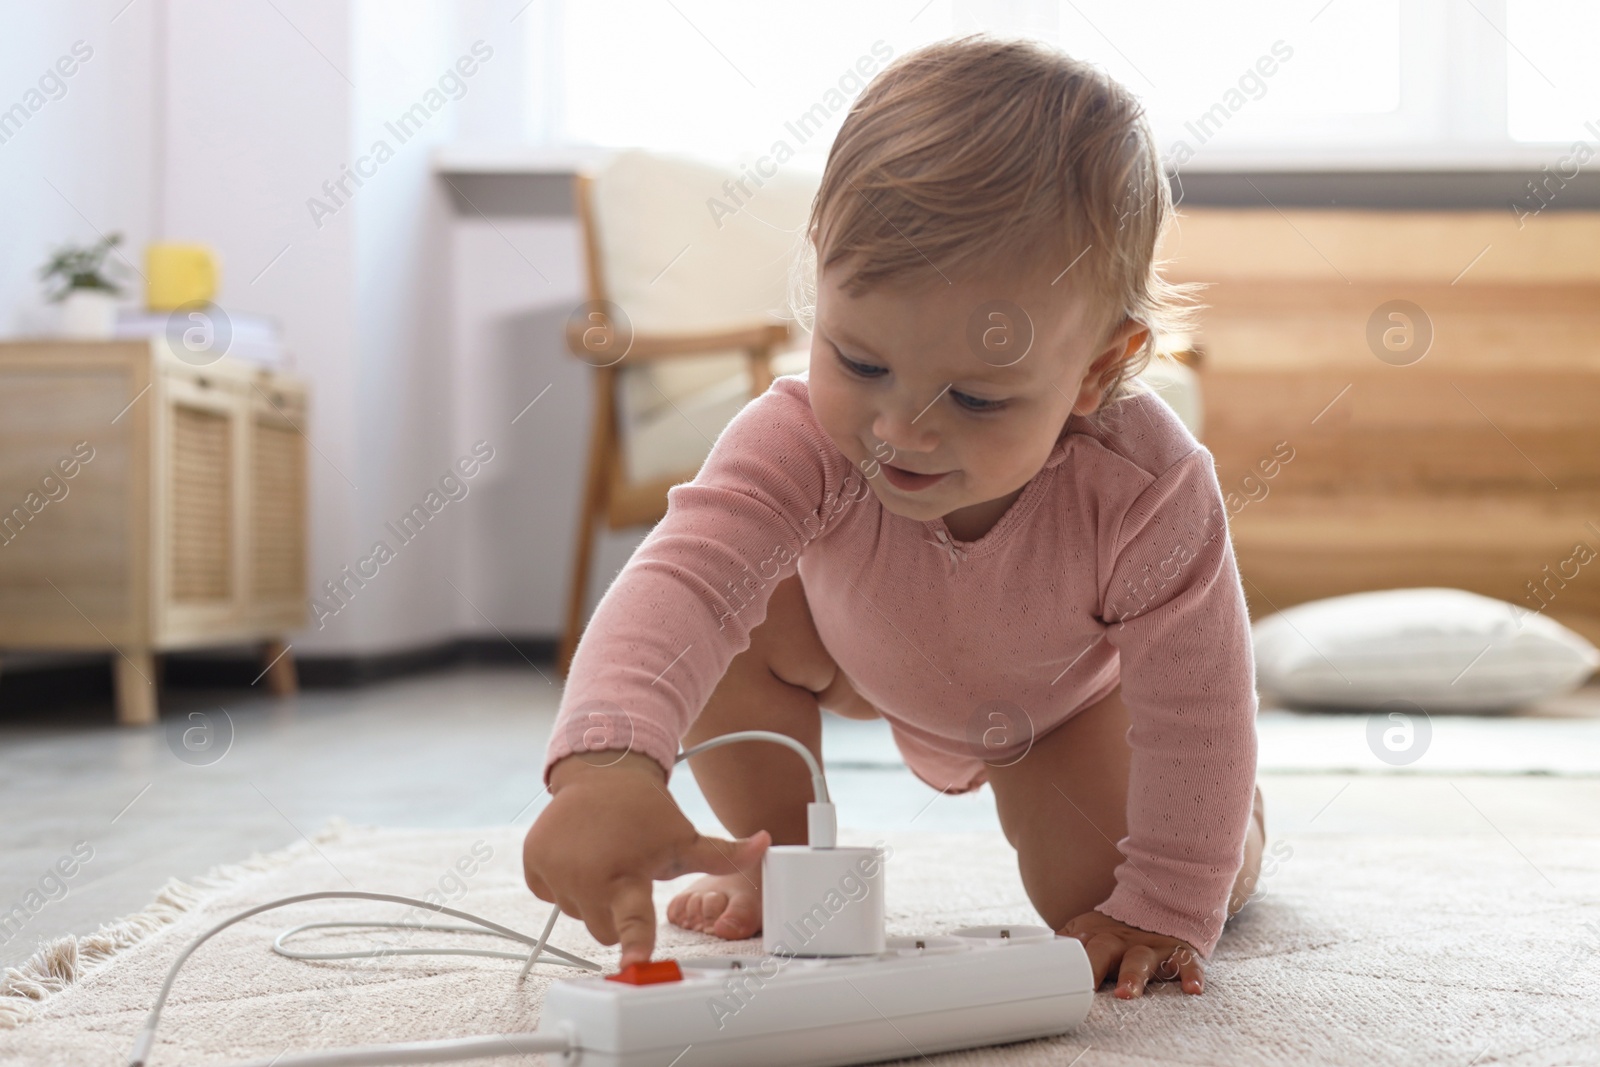 Photo of Cute baby playing with power strip on floor at home. Dangerous situation